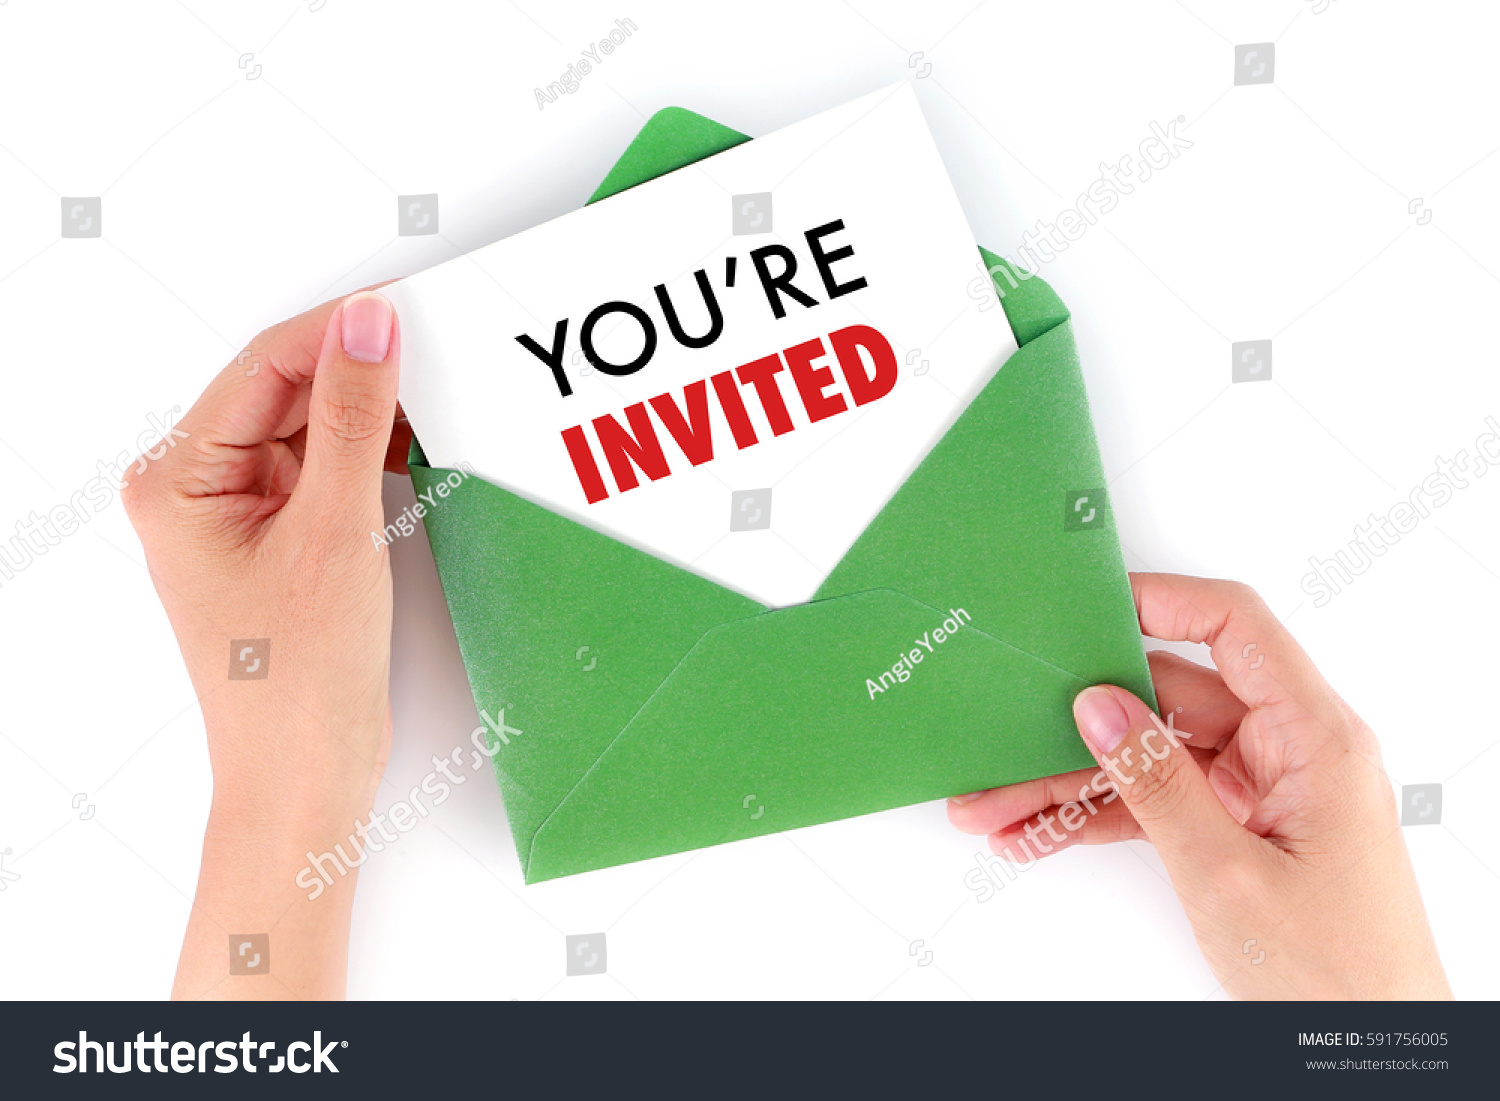 You're Invited Concepts - Hand holding a envelope and post card  #591756005